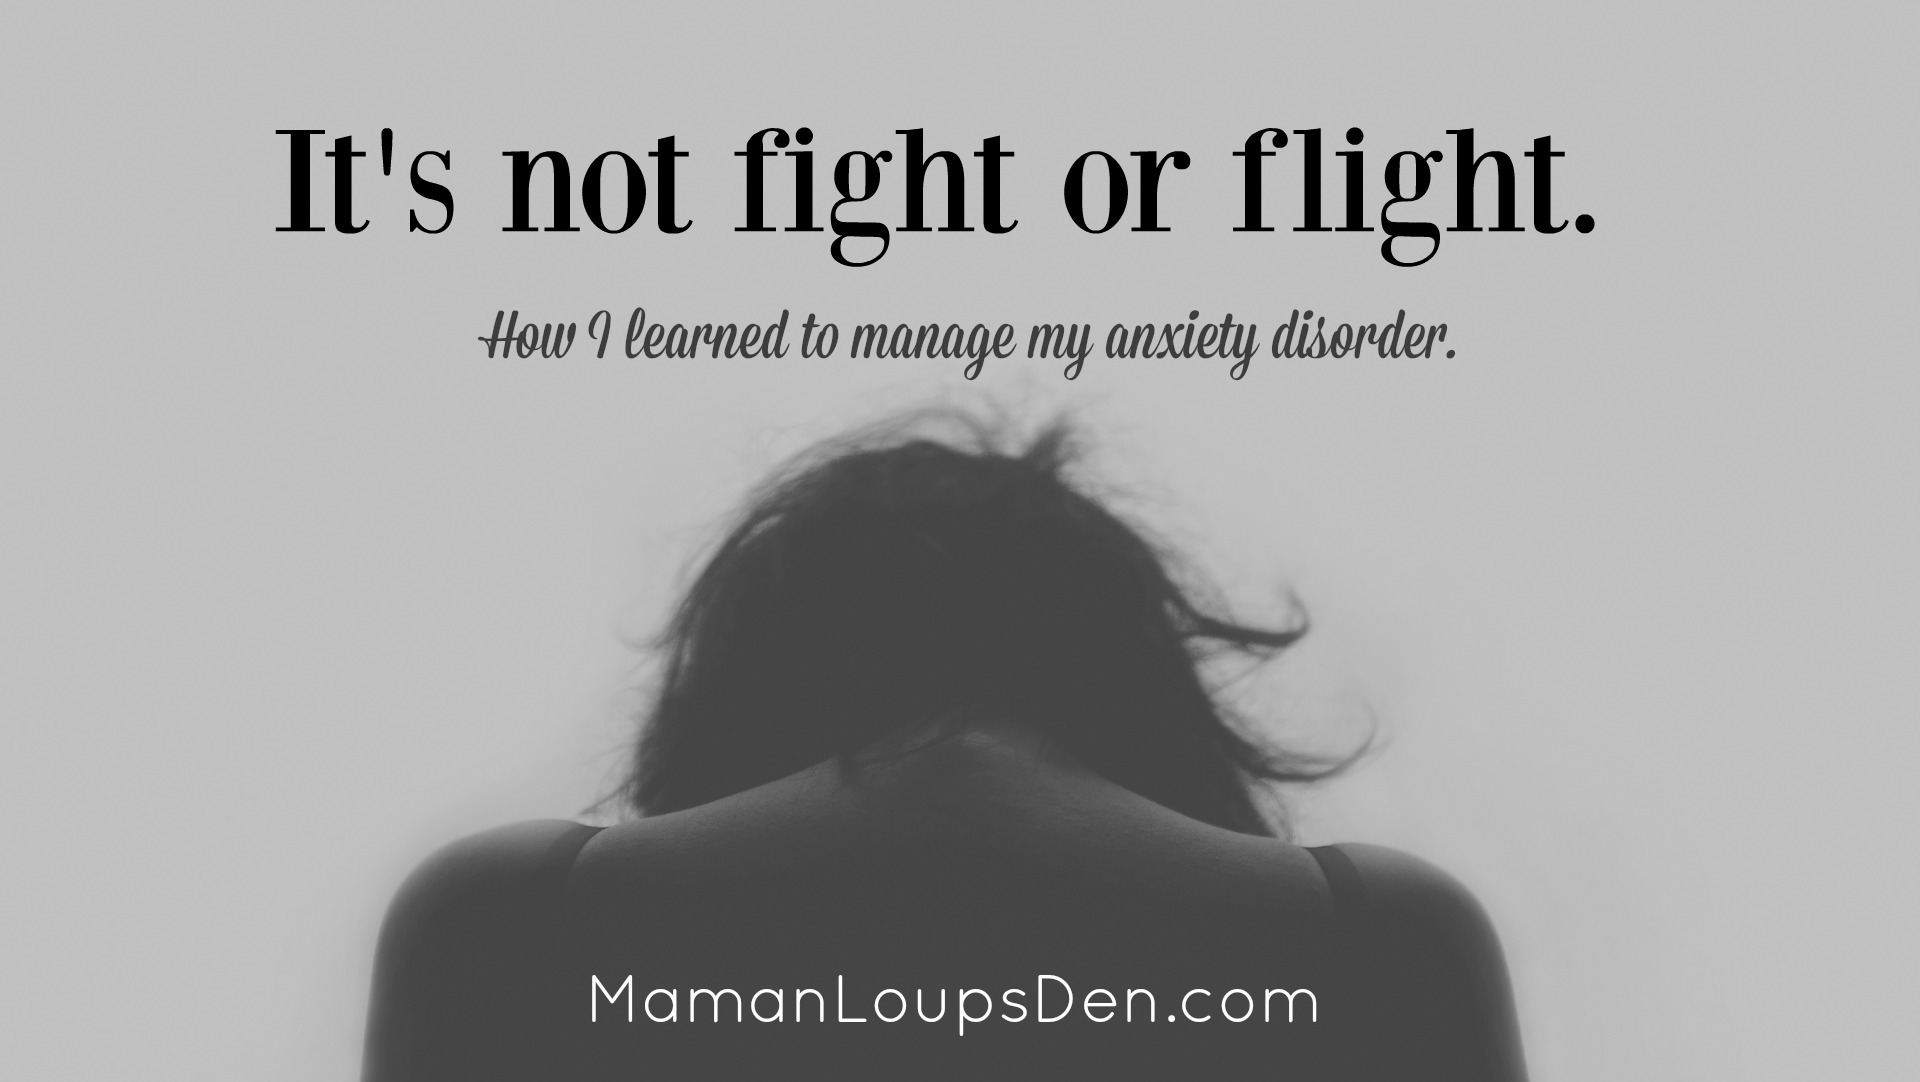 It's not fight or flight: How I learned to manage my anxiety disorder.